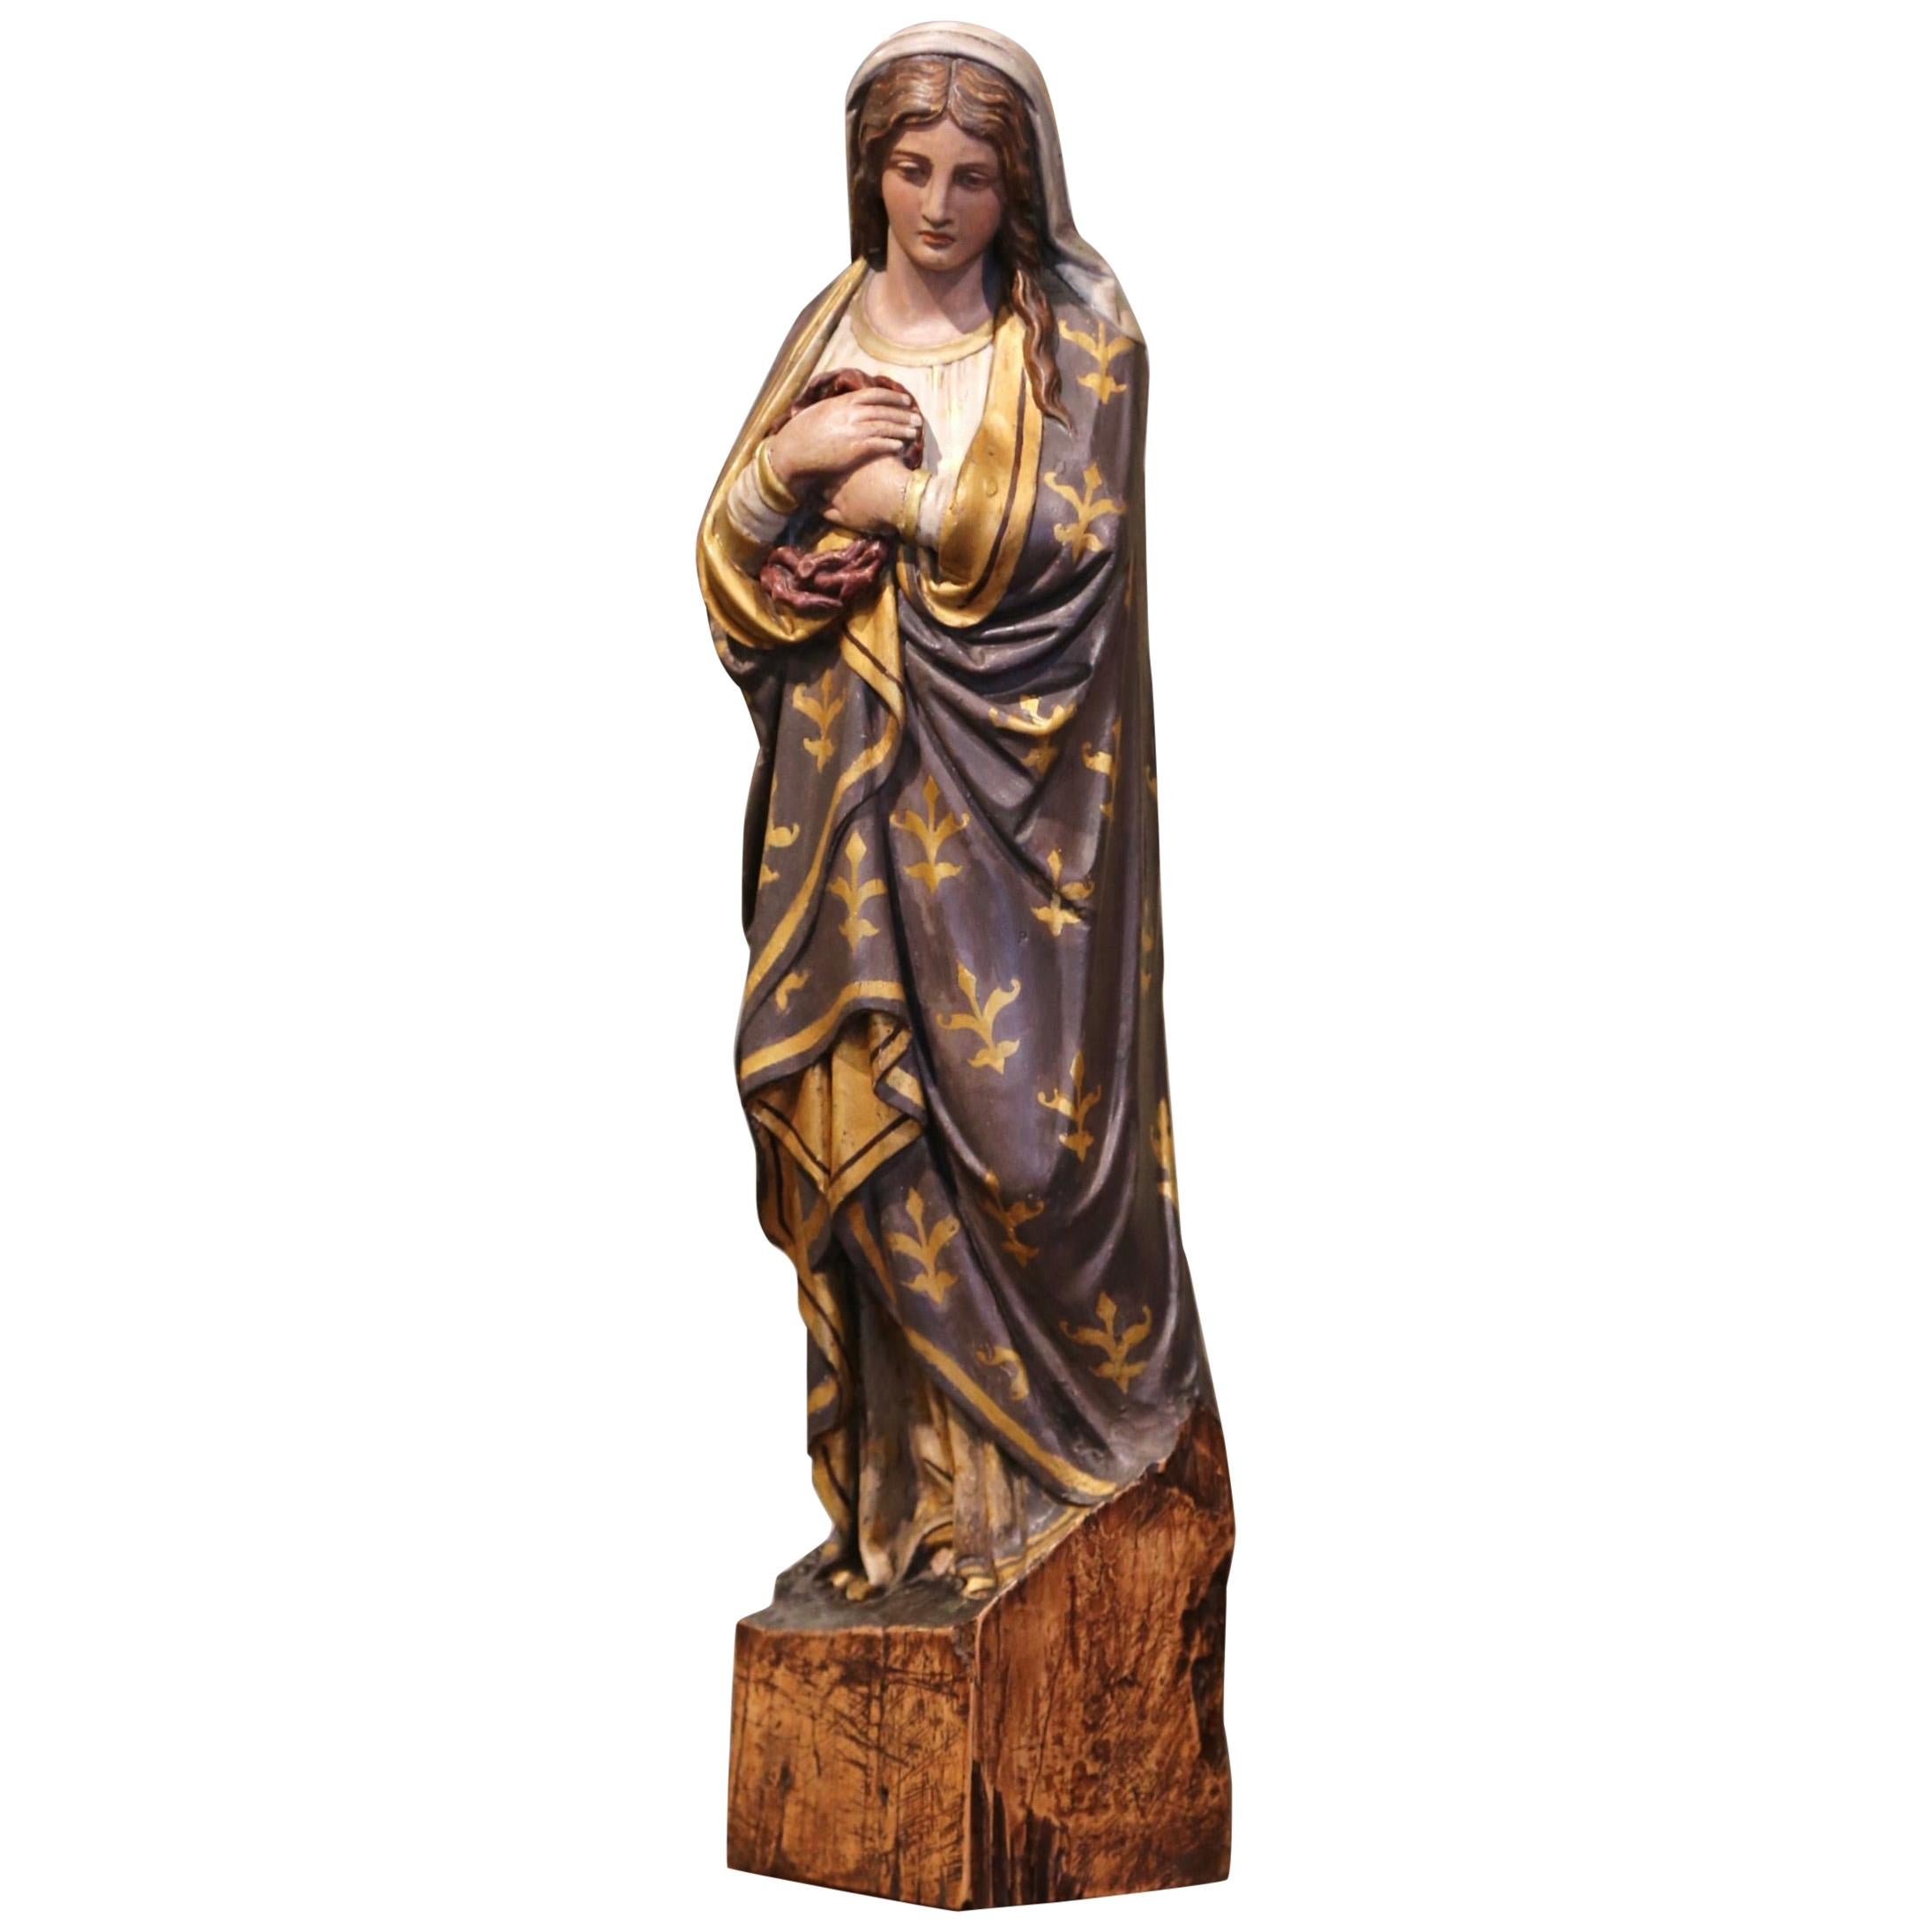 Mid-19th Century French Carved Giltwood and Polychrome Virgin Mary Statue